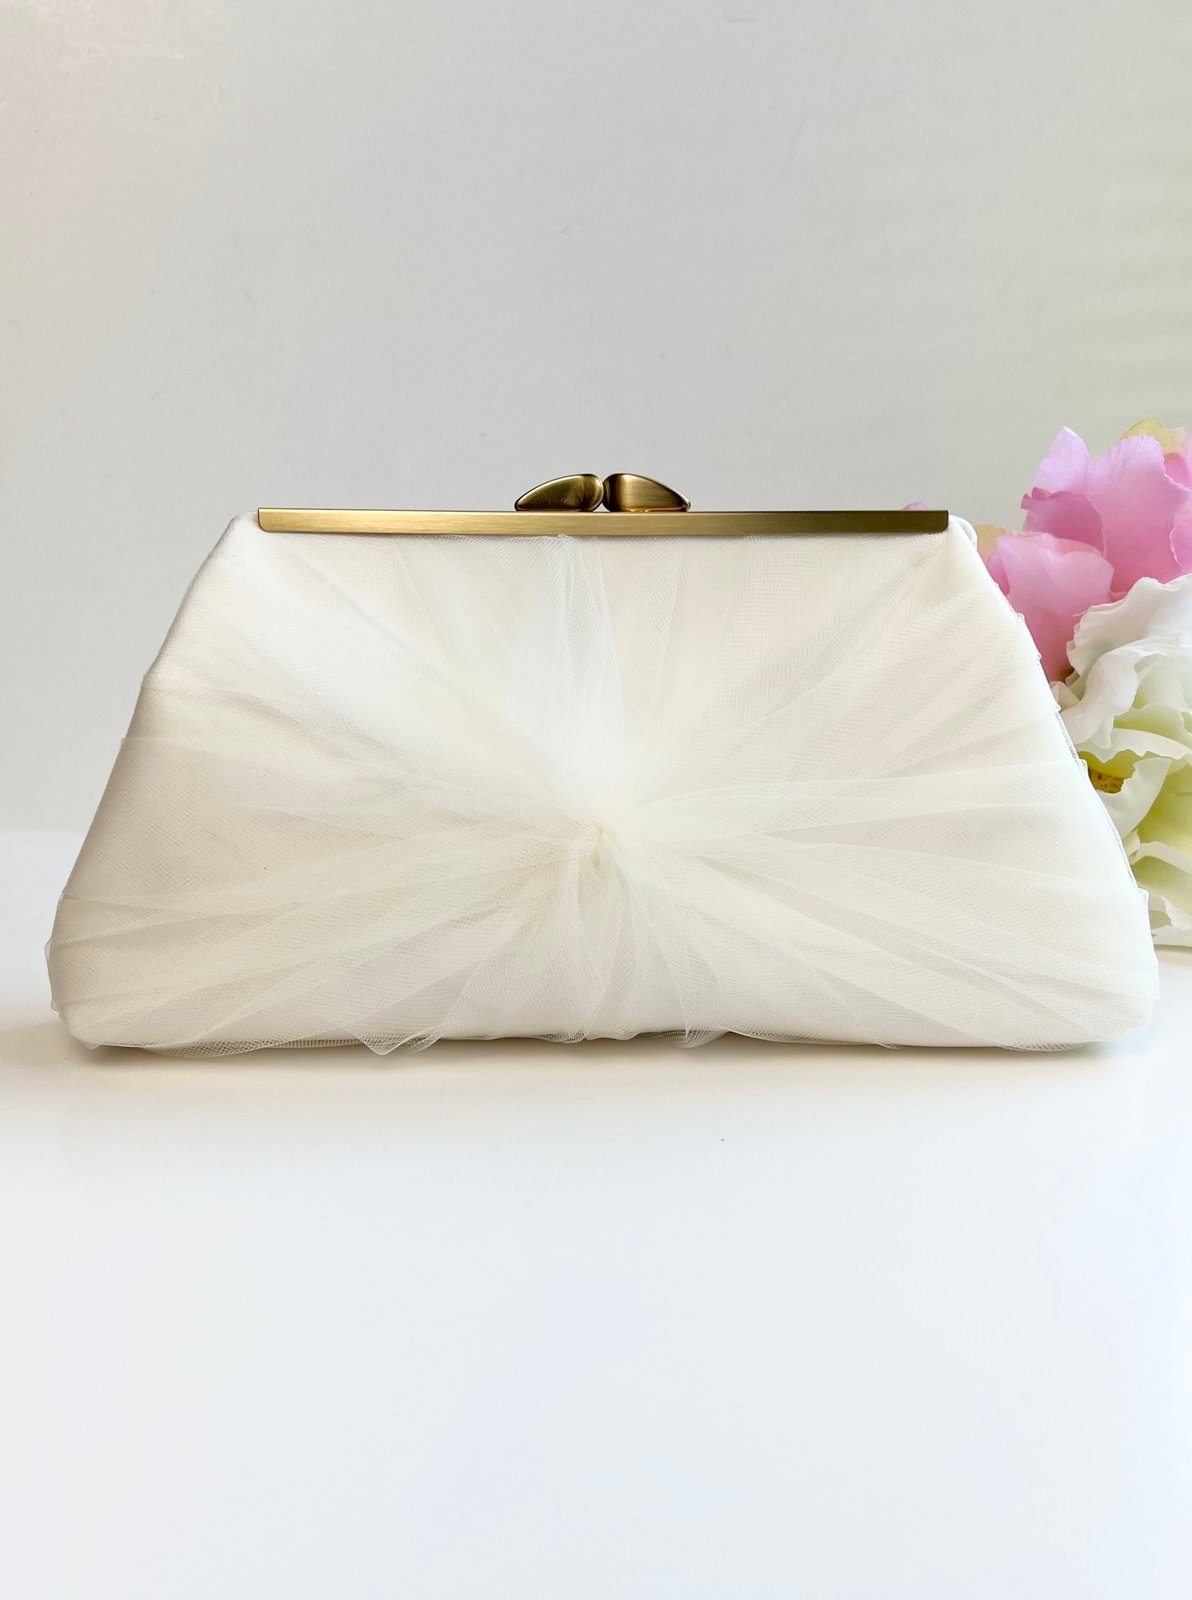 SKB Stylish & Fancy Evening Party Bridal Wedding Clutch Purse Beige Online  in India, Buy at Best Price from Firstcry.com - 13893430